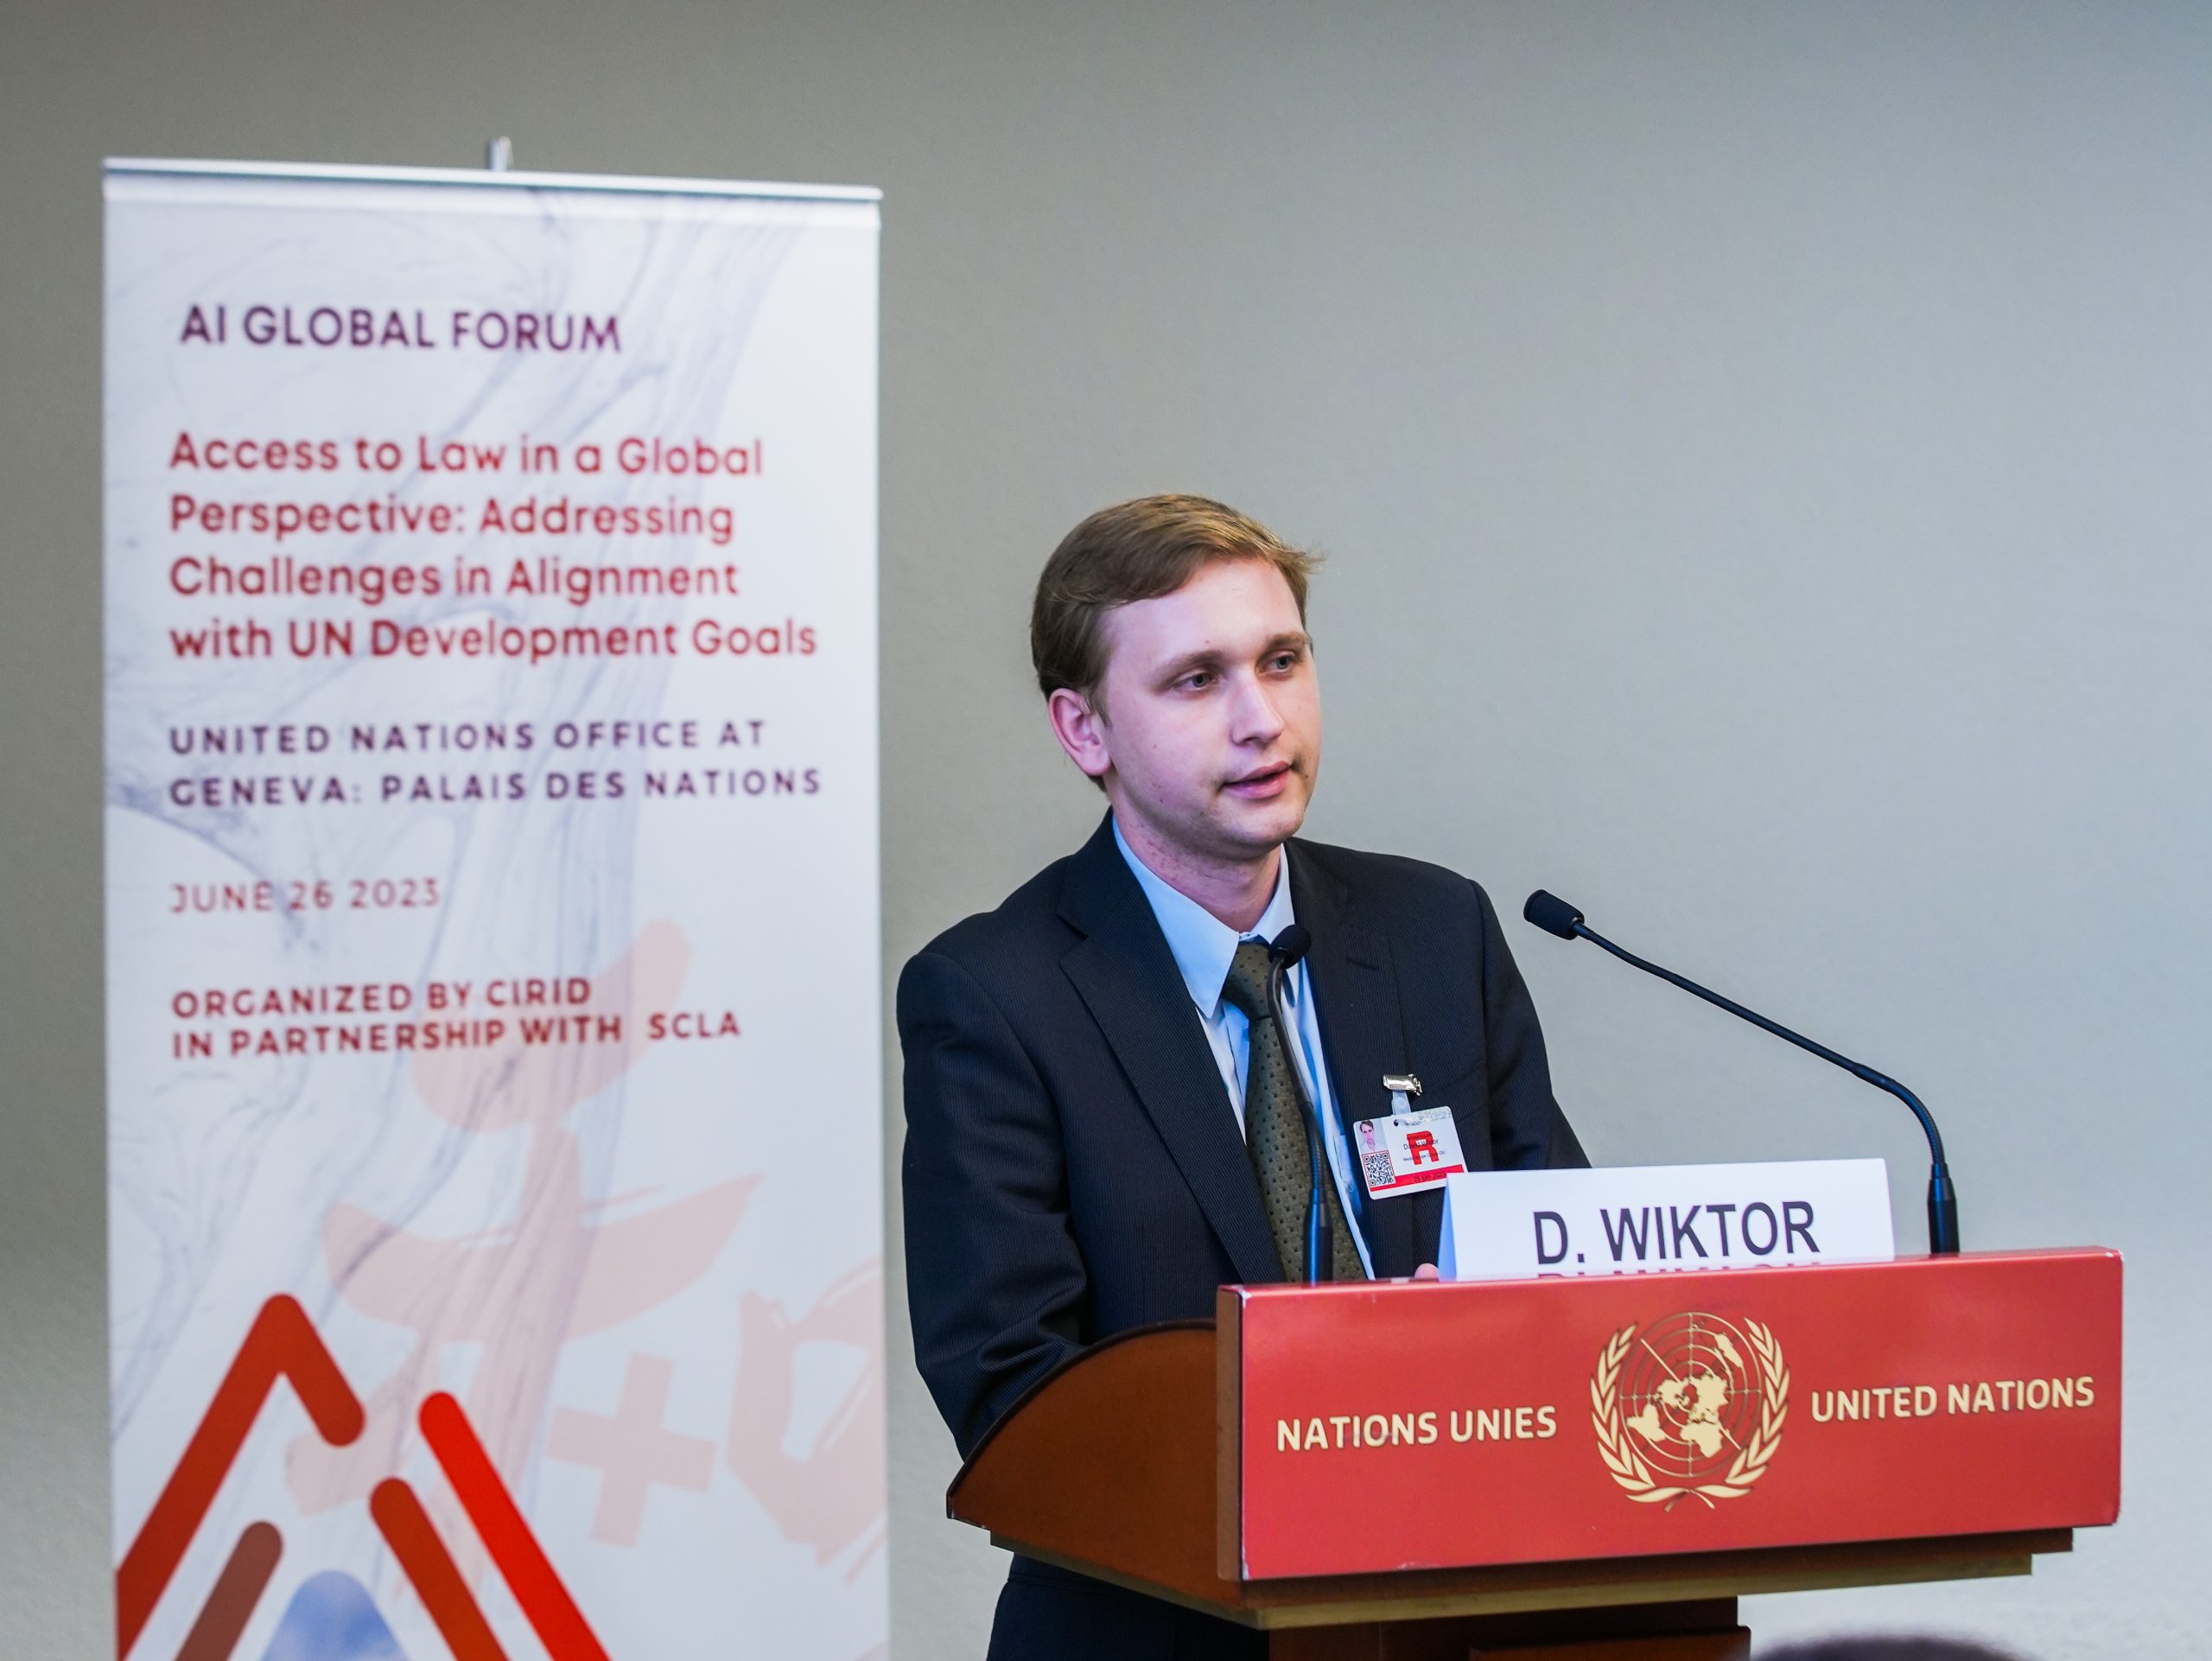 Dawid Wiktor speaks at the AI Global Forum at the United Nations